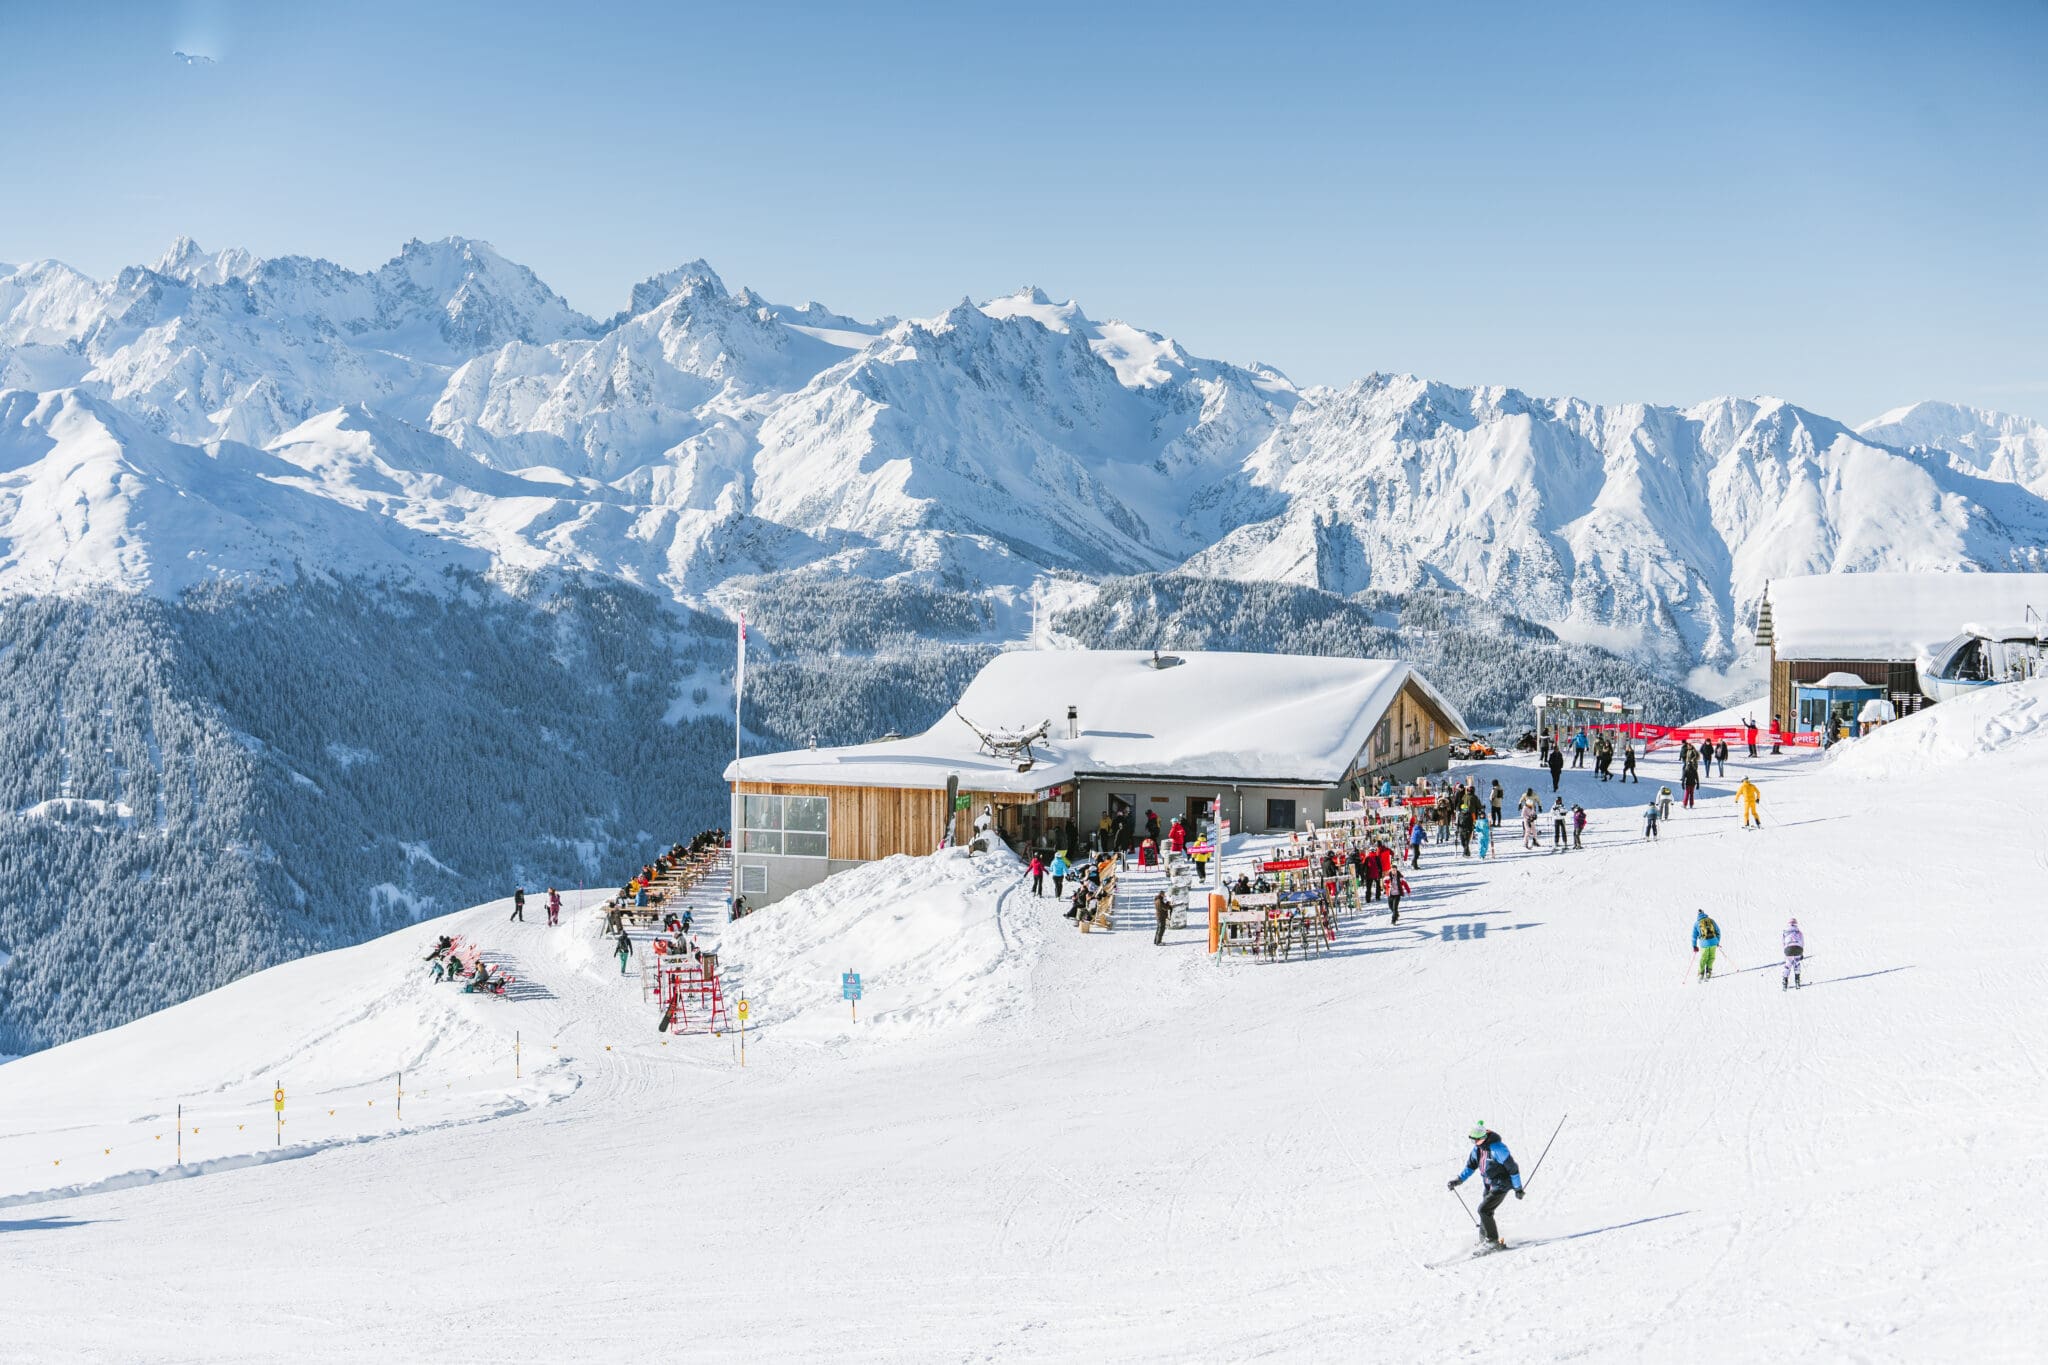 Why choose the Swiss Alps over North America for your Ski Holiday